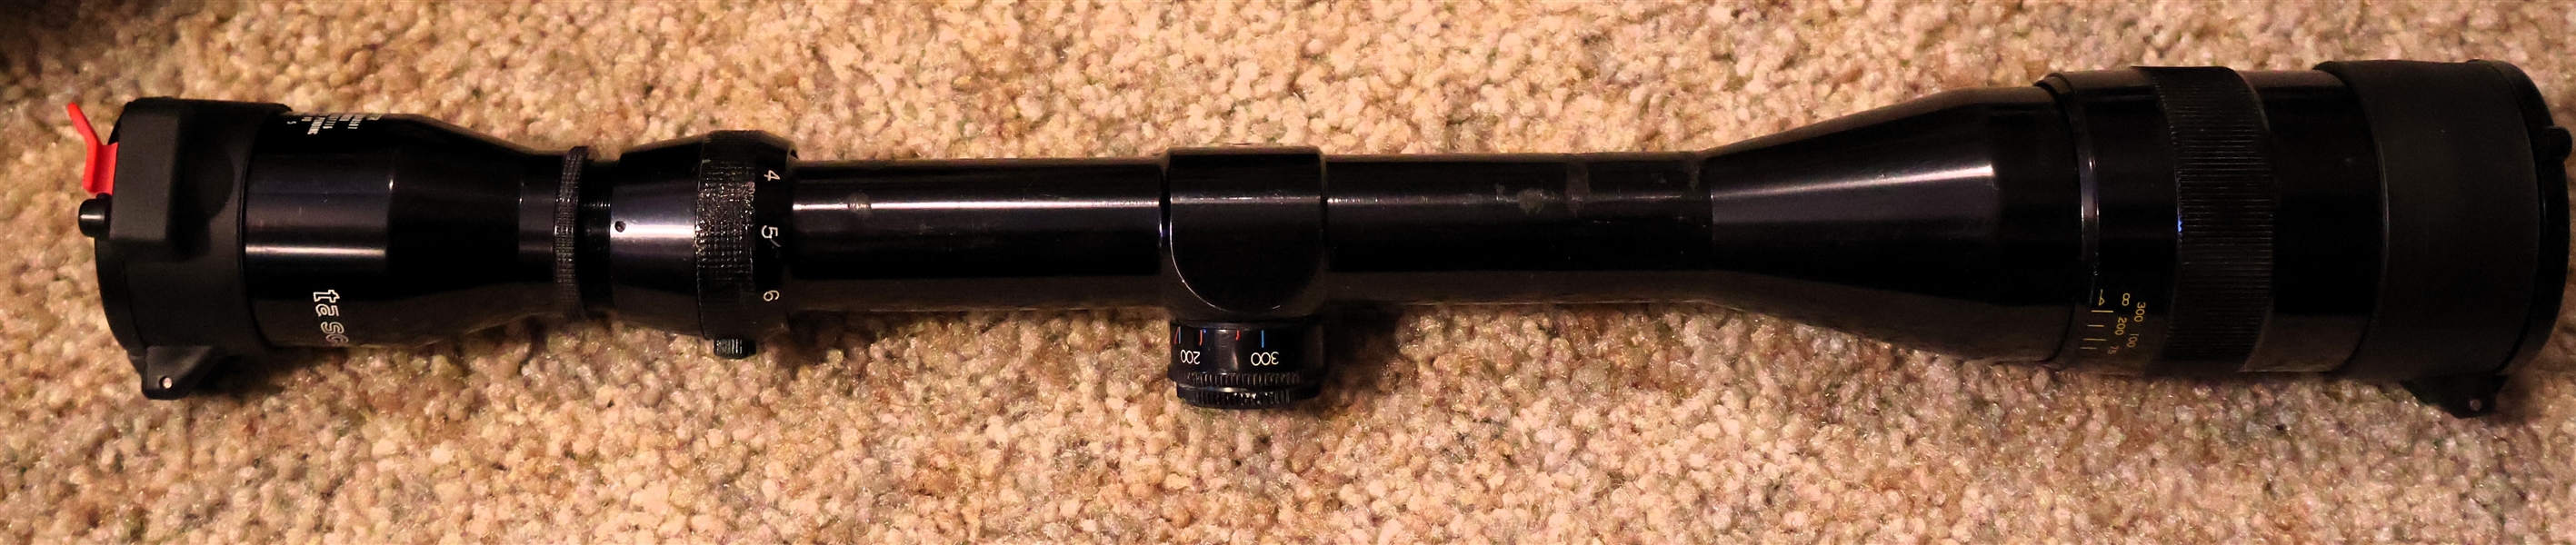 Tasco 4-12 X 40 Scope with Lens Covers - #619TR - Made in Japan 